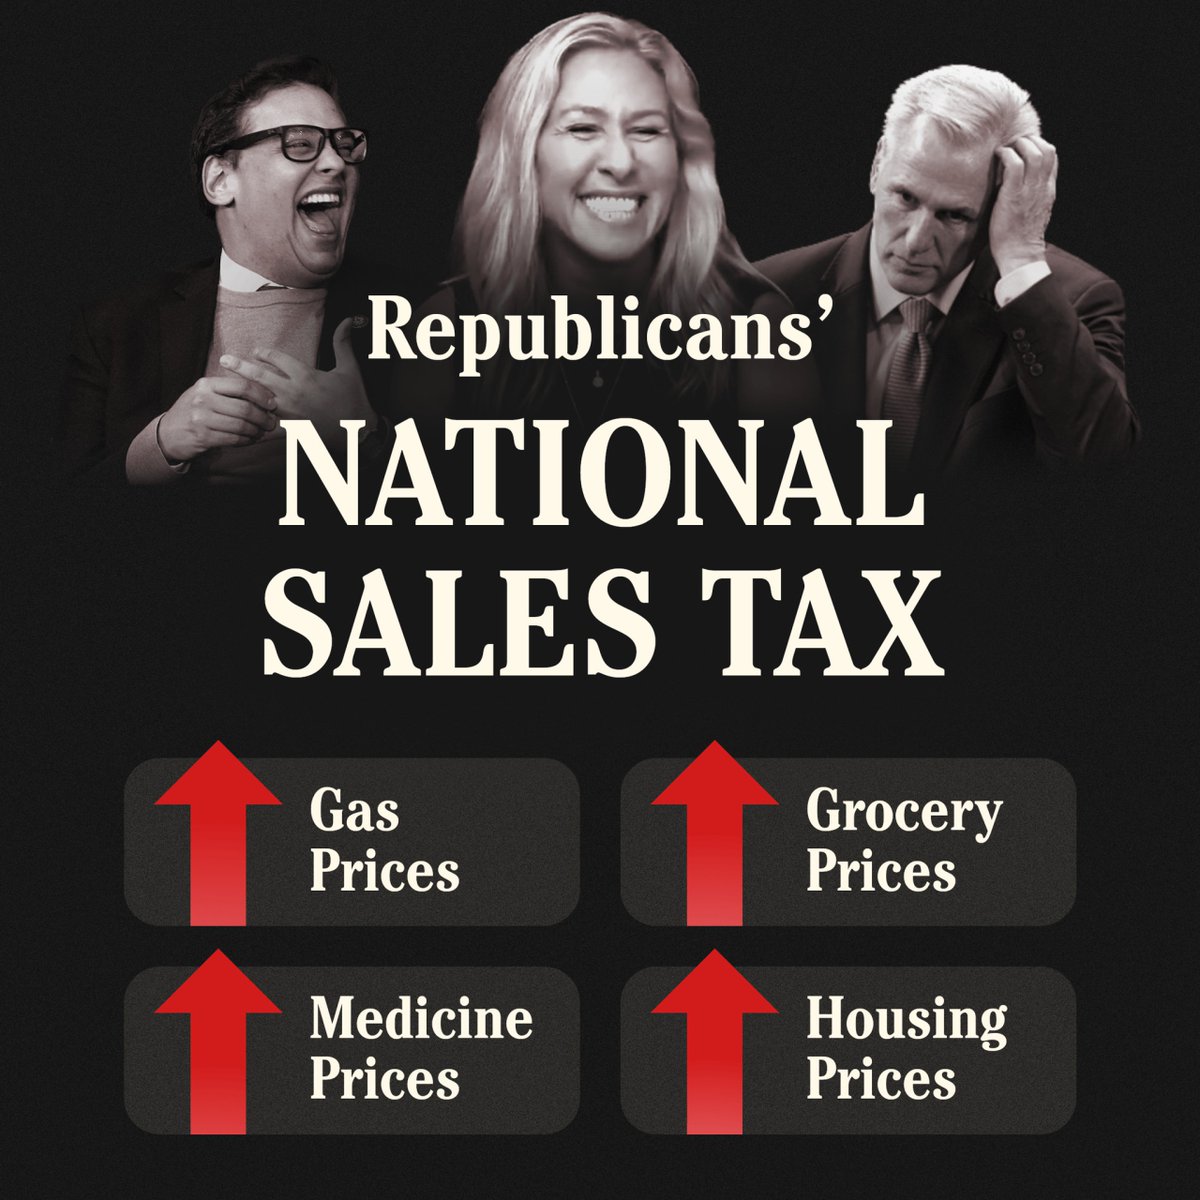 The Republicans' national sales tax would be a disaster for families and devastating to our economy. 

It would drive up costs for those least able to afford it, while threatening the collapse of SS, Medicare, and critical programs we all rely on. 

#RepublicanTaxHeist #DemCastMI